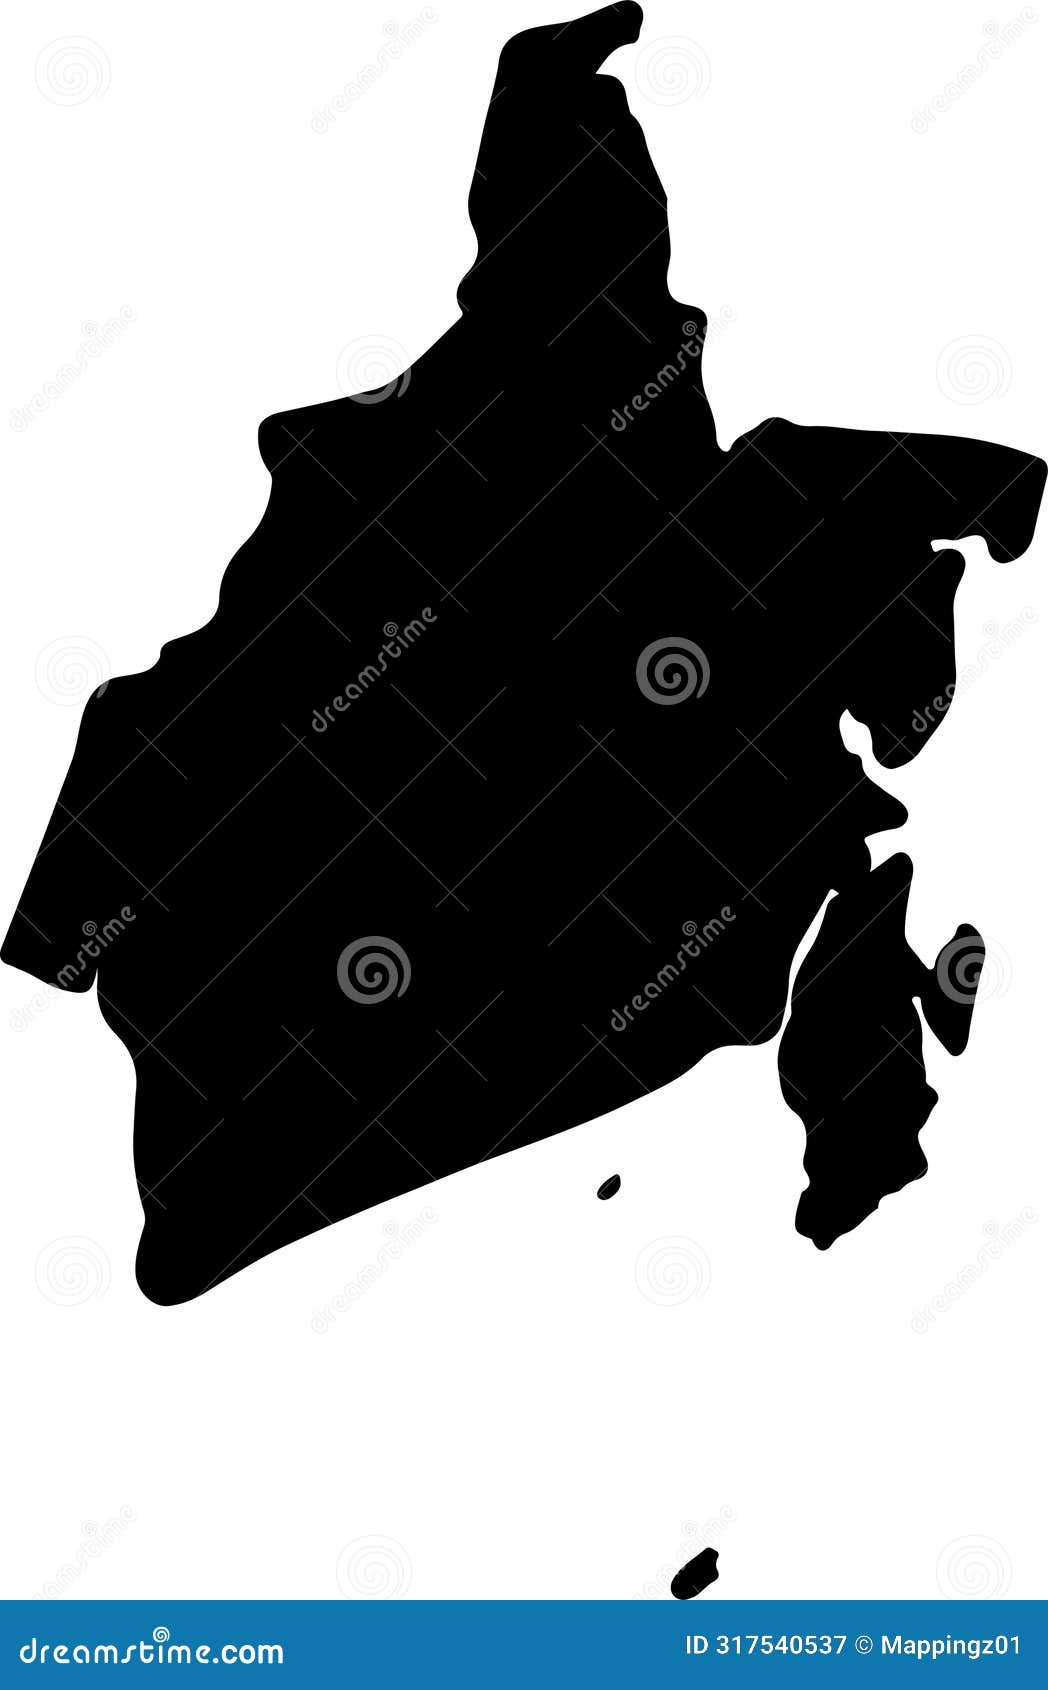 kalimantan selatan indonesia silhouette map with transparent background